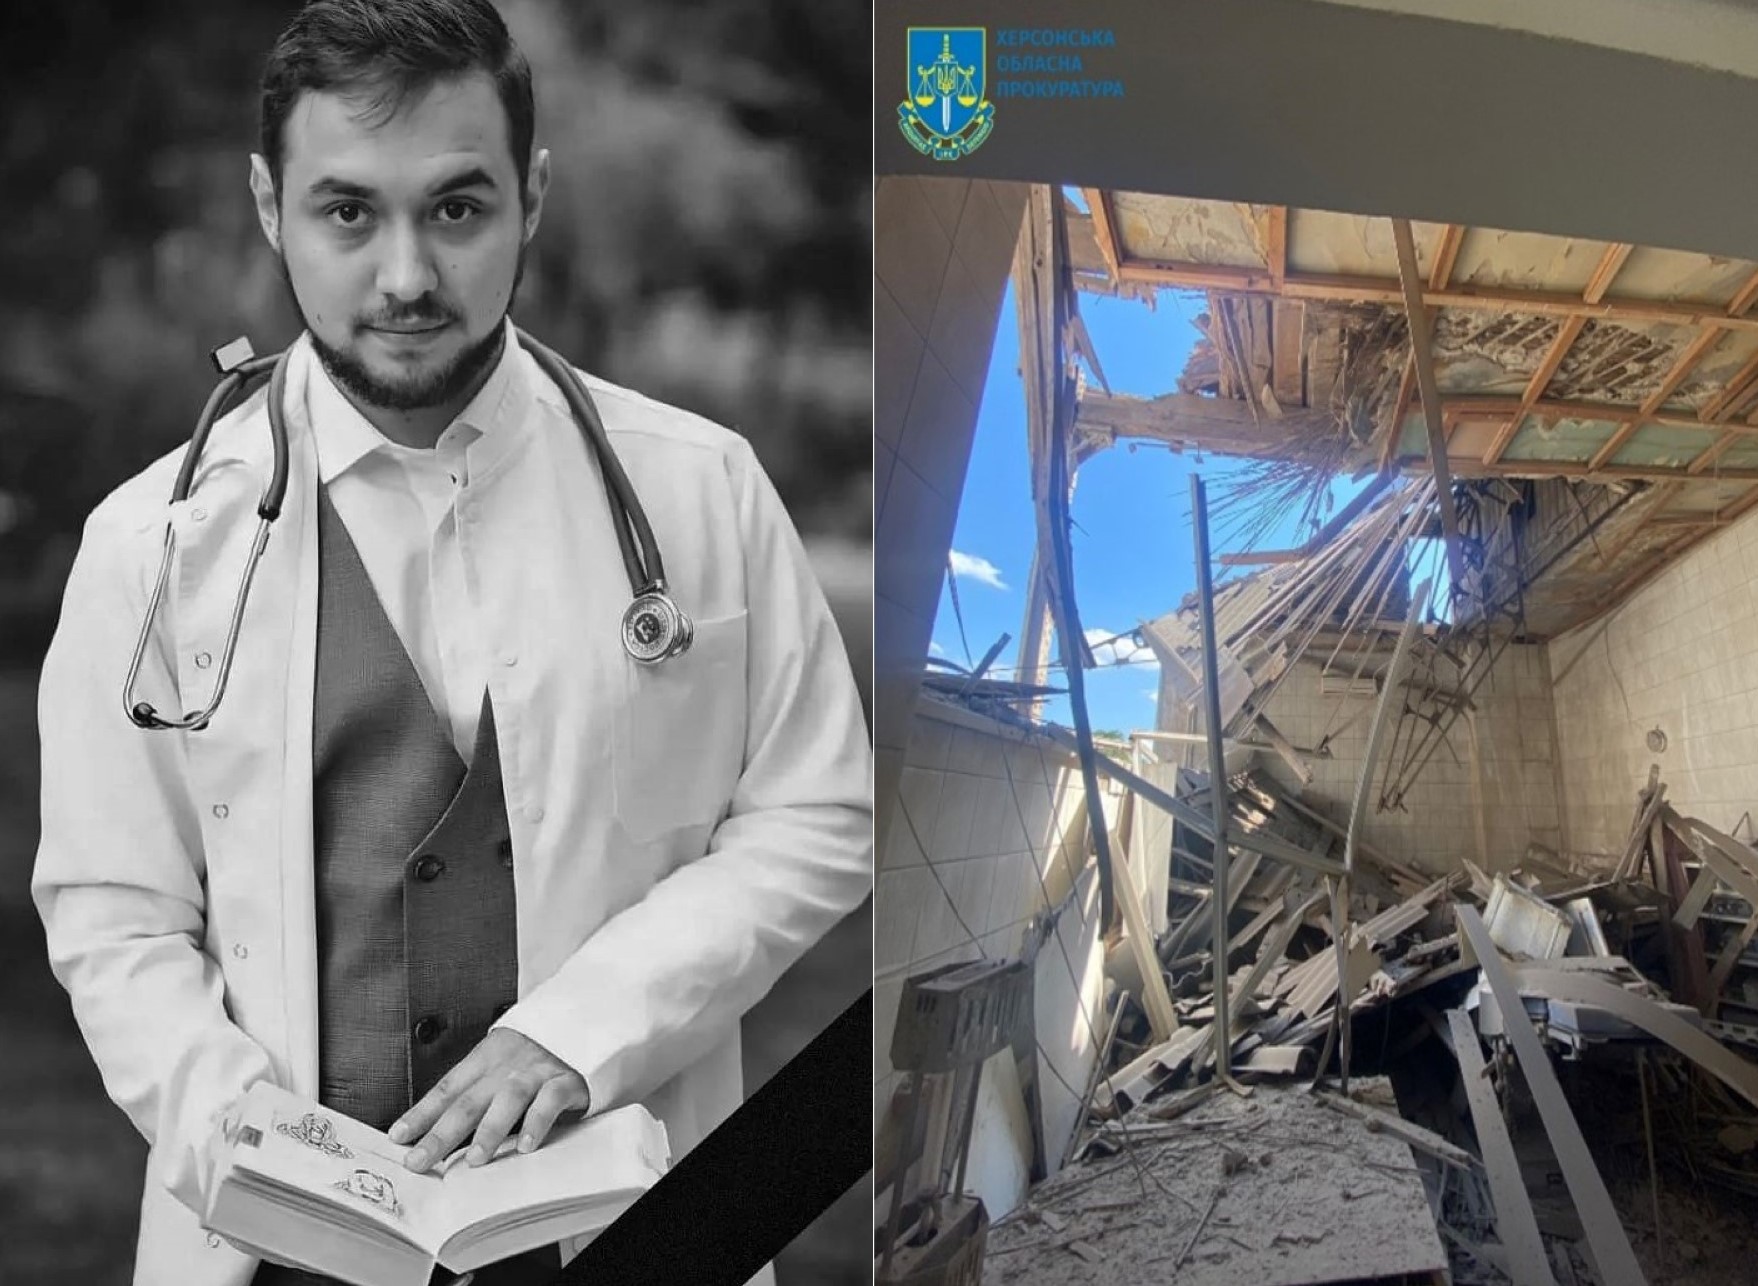 Dr Dmytro Bily, killed by the Russians on 1 August 2023 Photo posted by Most, Hospital after Russia’s attack Photo Prosecutor General’s Office